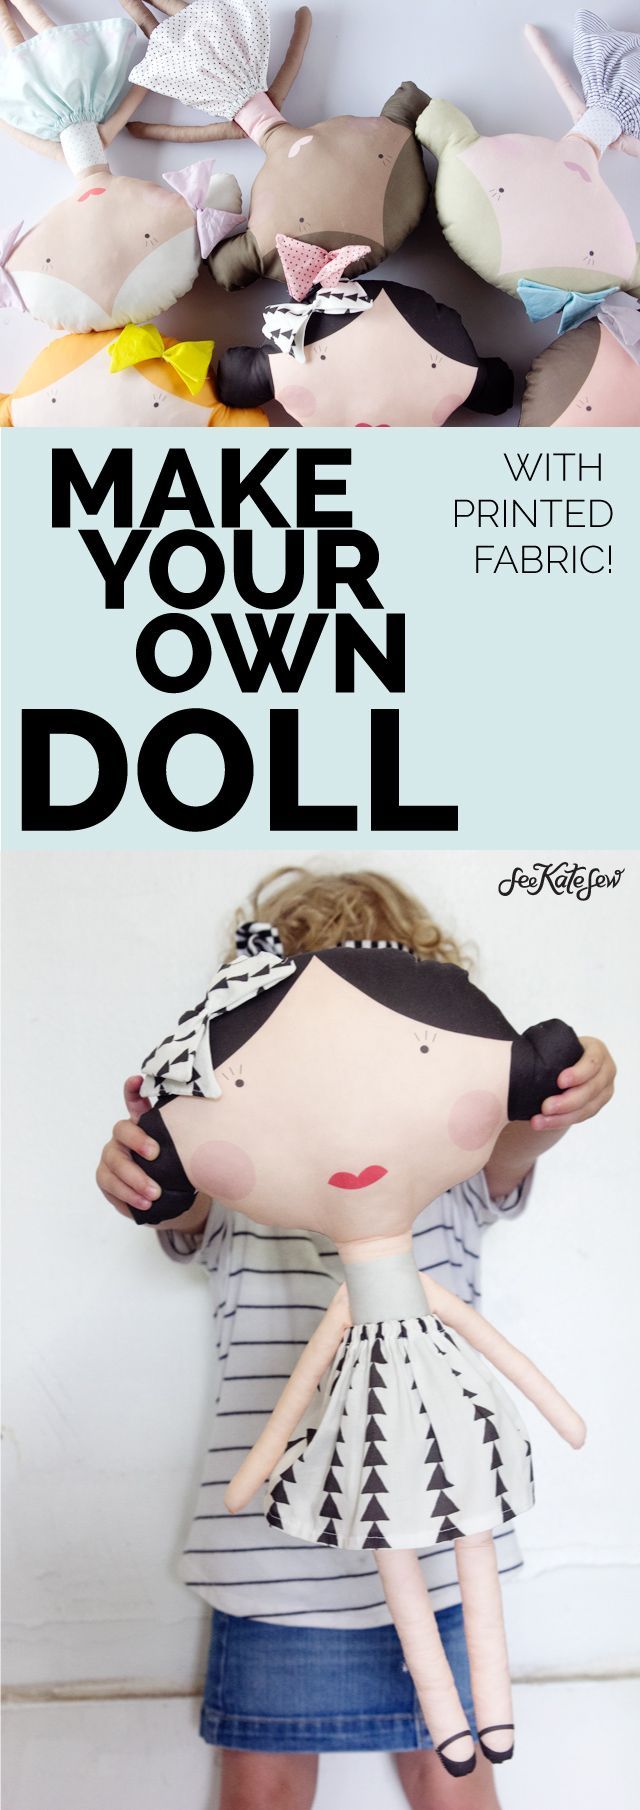 Make your own doll with pri